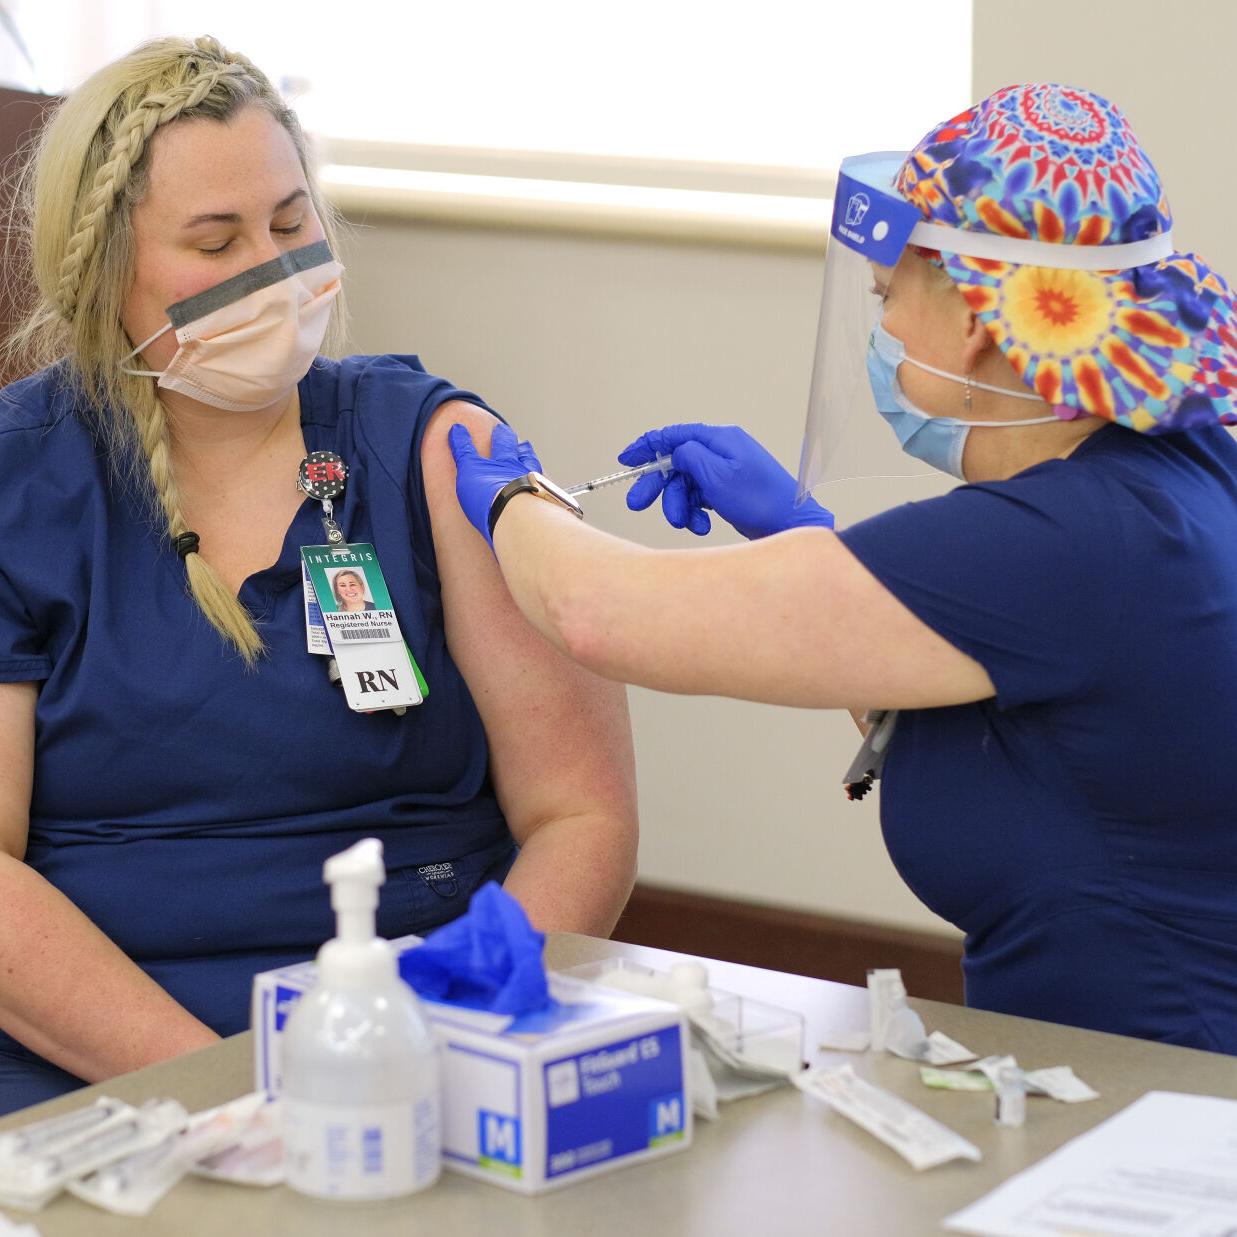 Nurse First To Receive Covid-19 Vaccine In Oklahoma State And Regional News Tulsaworldcom